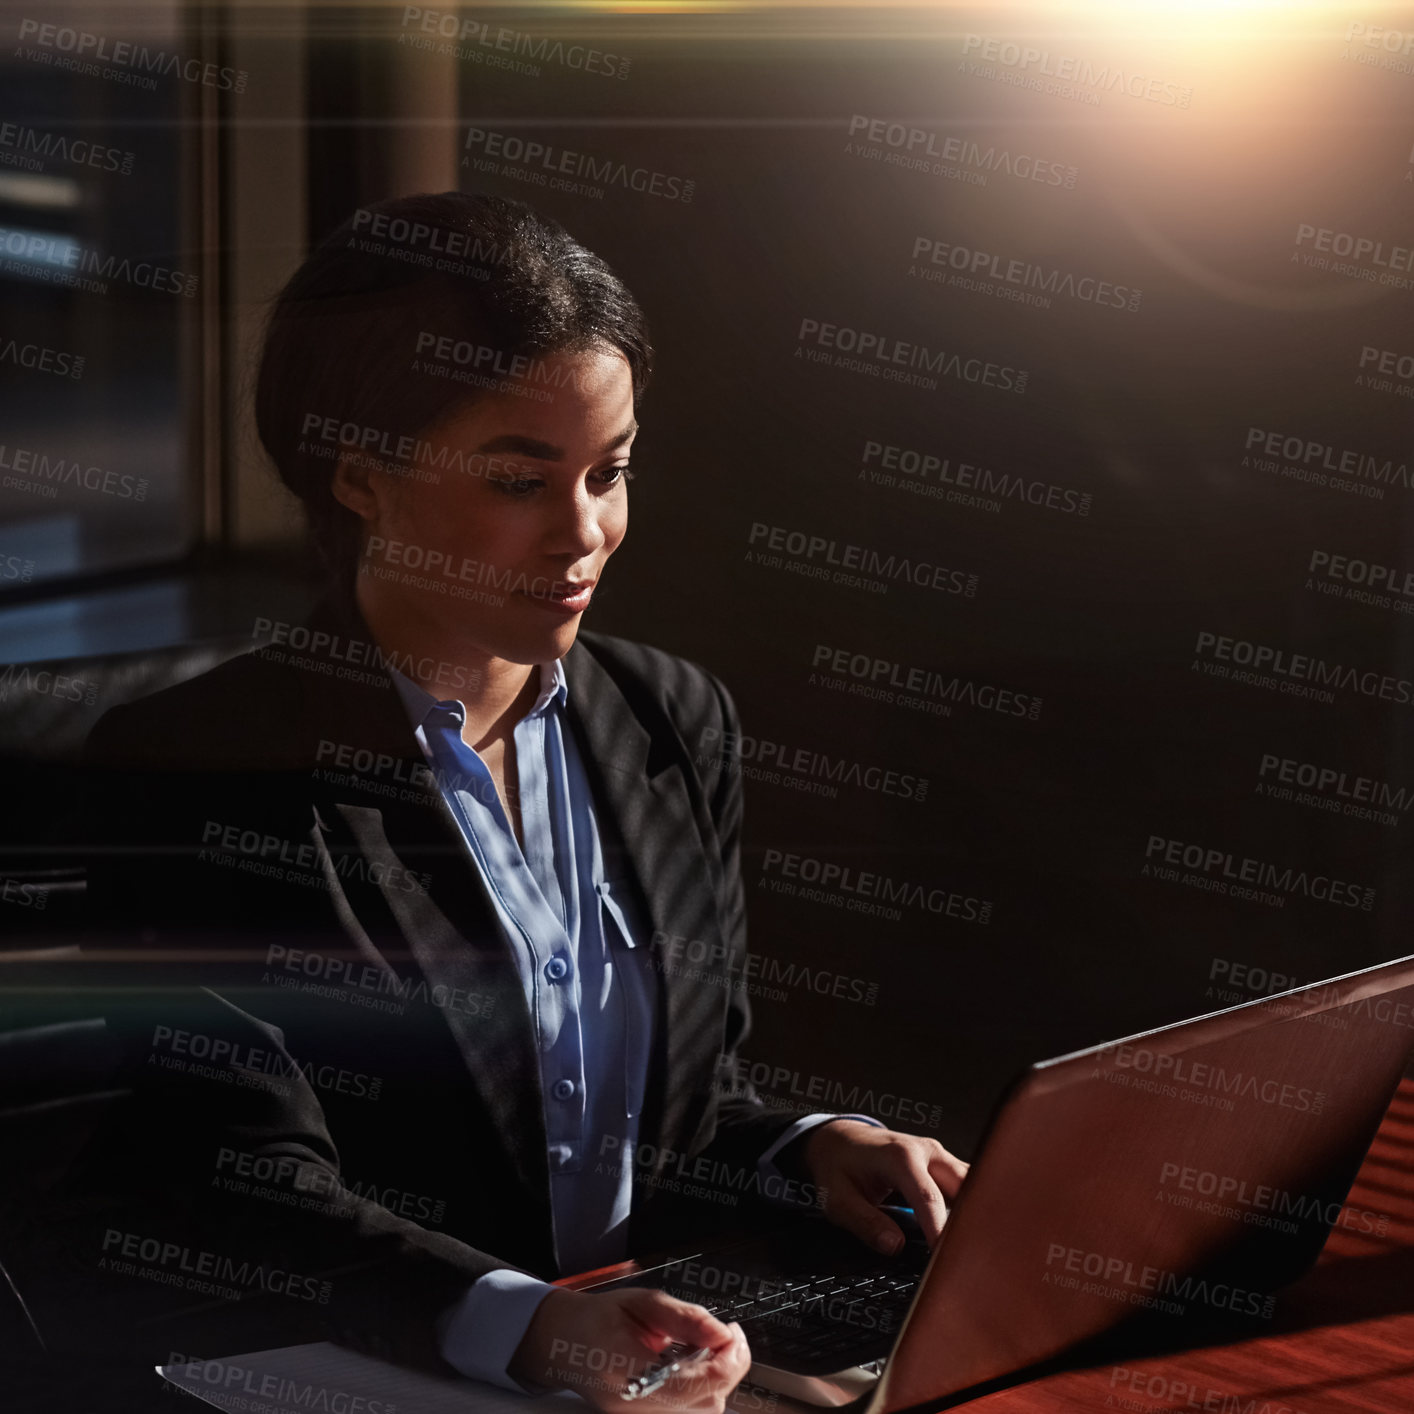 Buy stock photo Shot of a businesswoman using her laptop at her desk